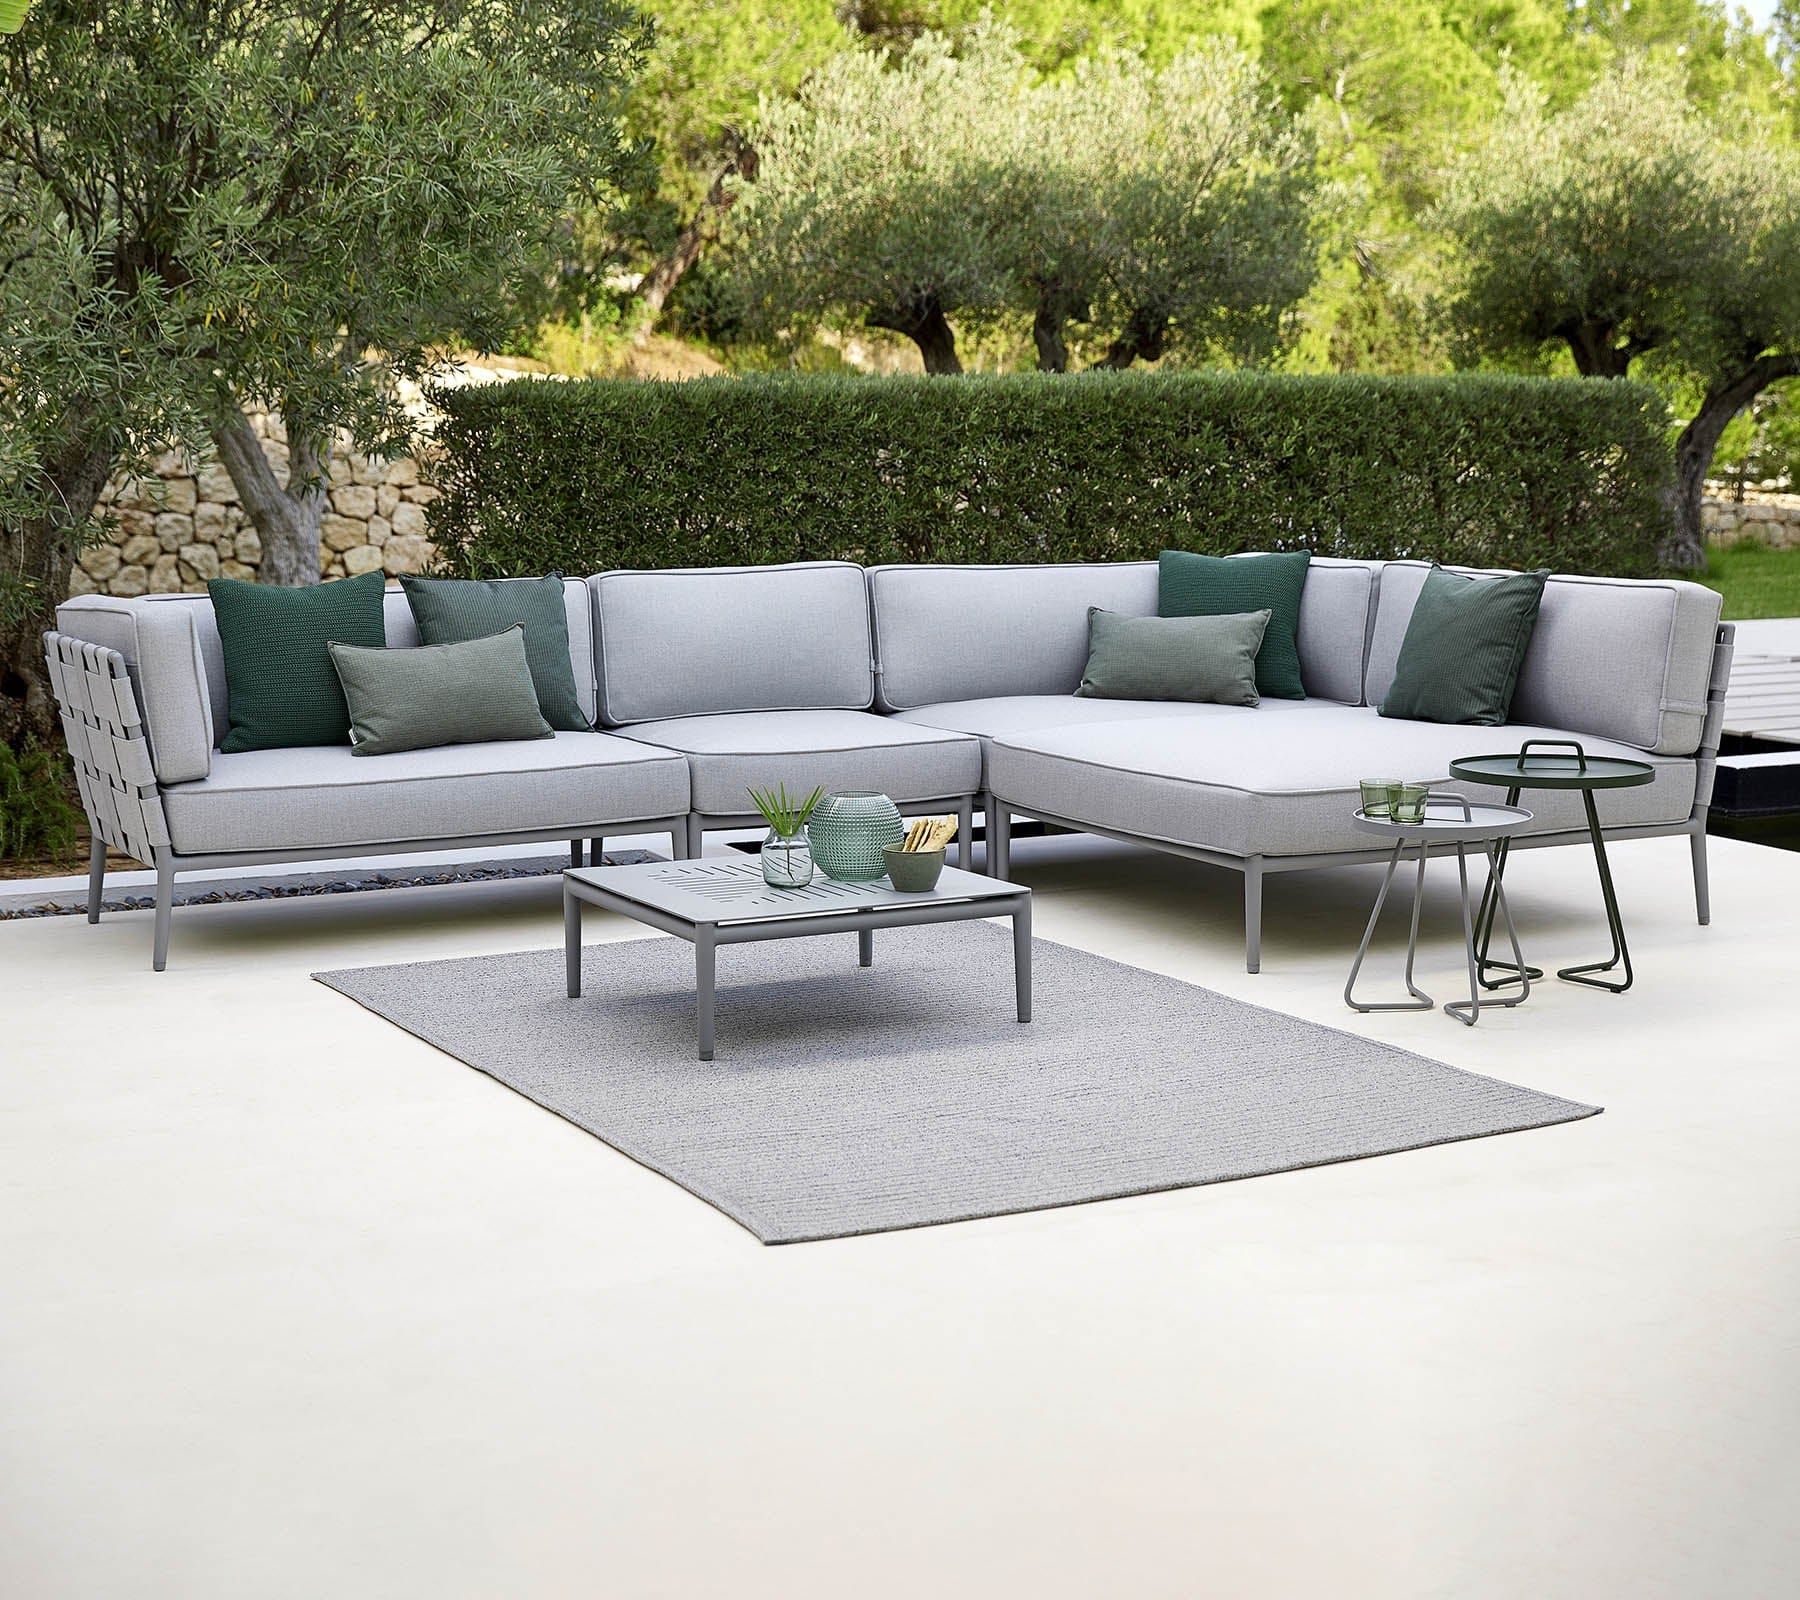 Boxhill's Conic Lounge Sectional Daybed Light Grey lifestyle image with Conic Sectional Sofa and Conic Coffee Table at patio